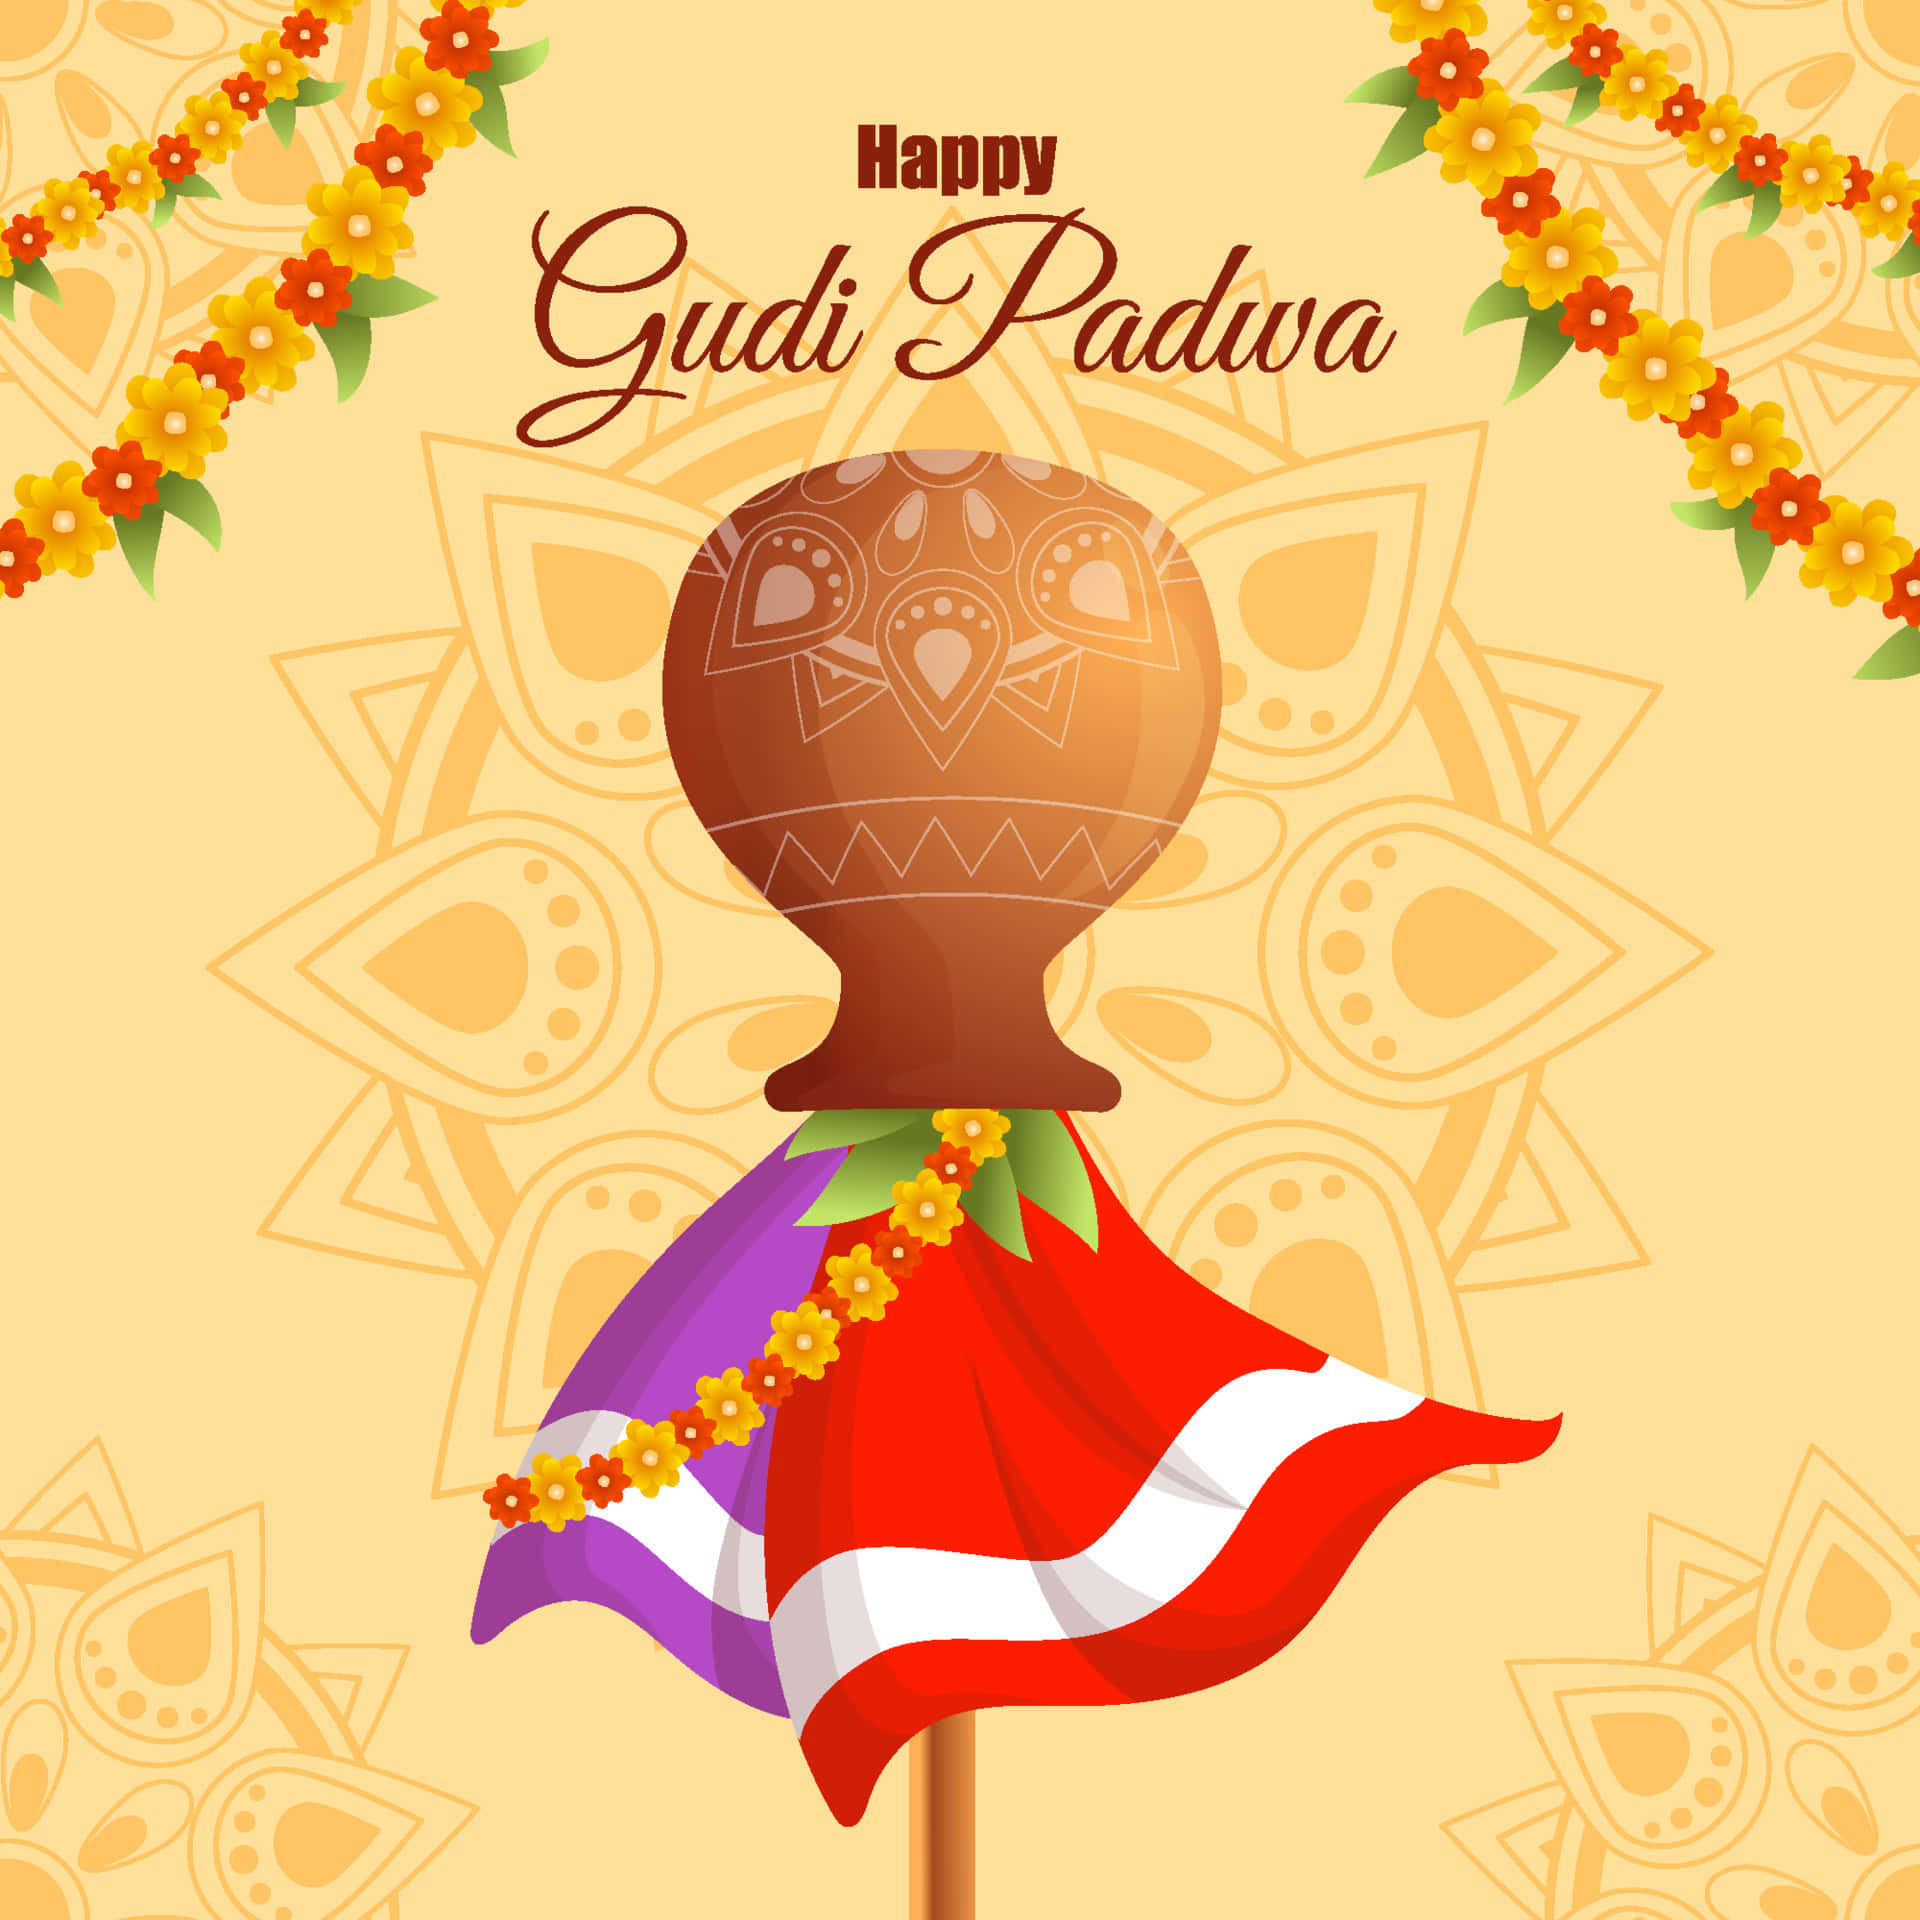 Happy Gudi Padwa With A Red Cloth And A Garland